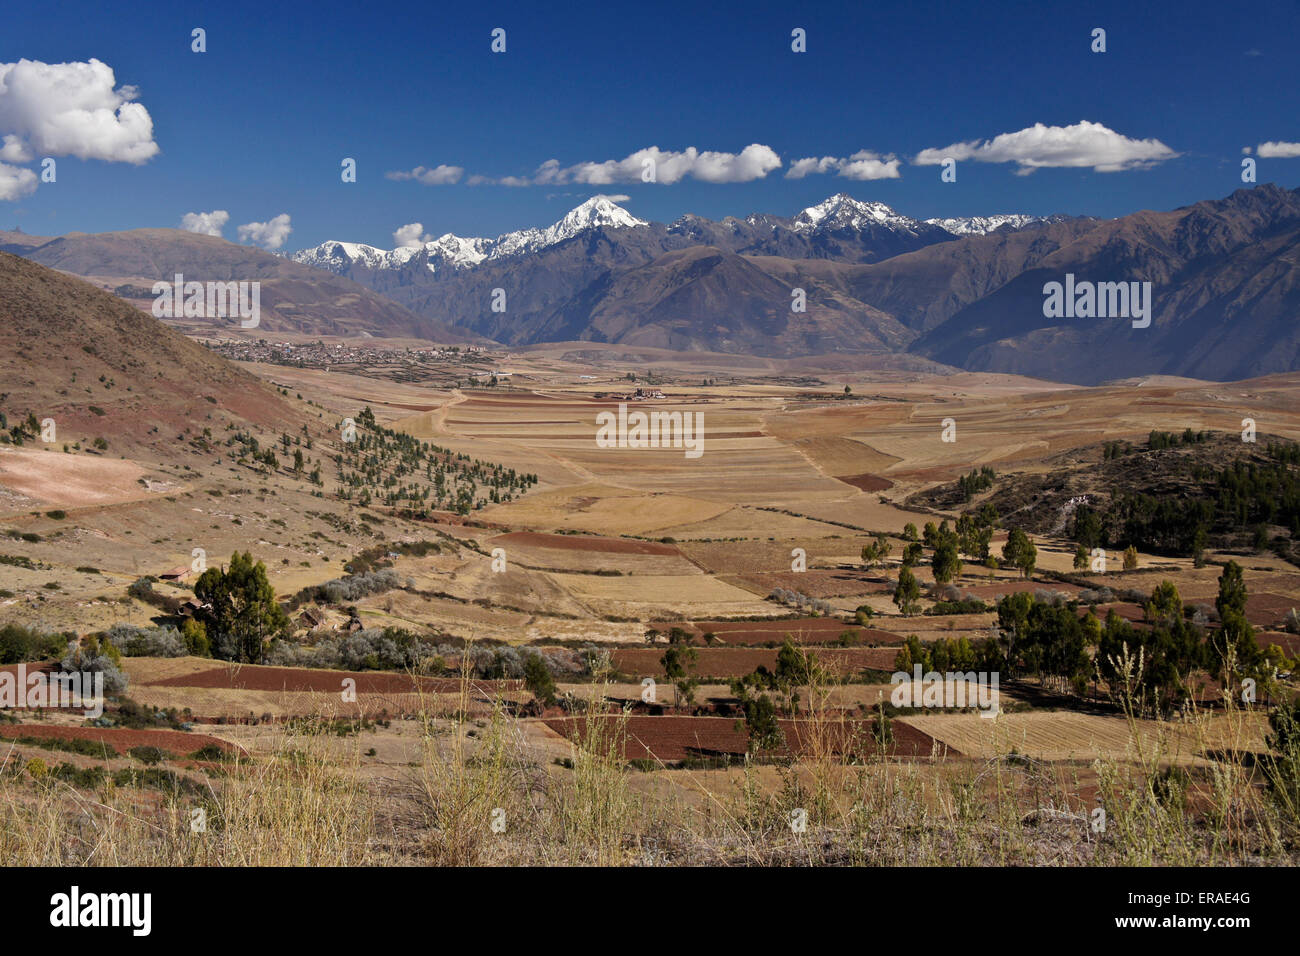 The Urubamba Valley and the Andes mountains, Peru Stock Photo